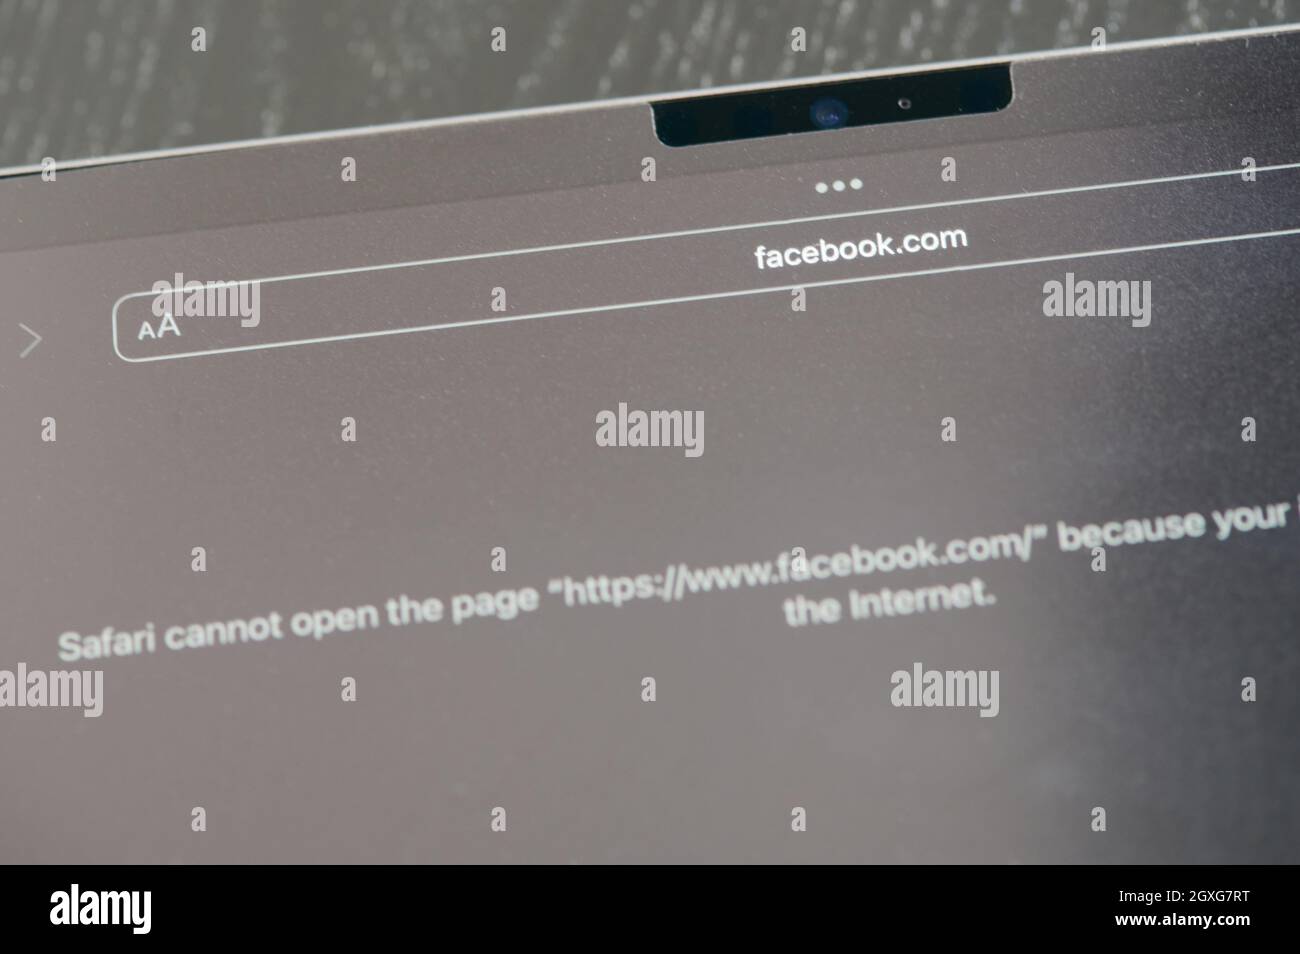 New york, USA - October 5 2021: Offline mode in facebook service on tablet screen close up view Stock Photo